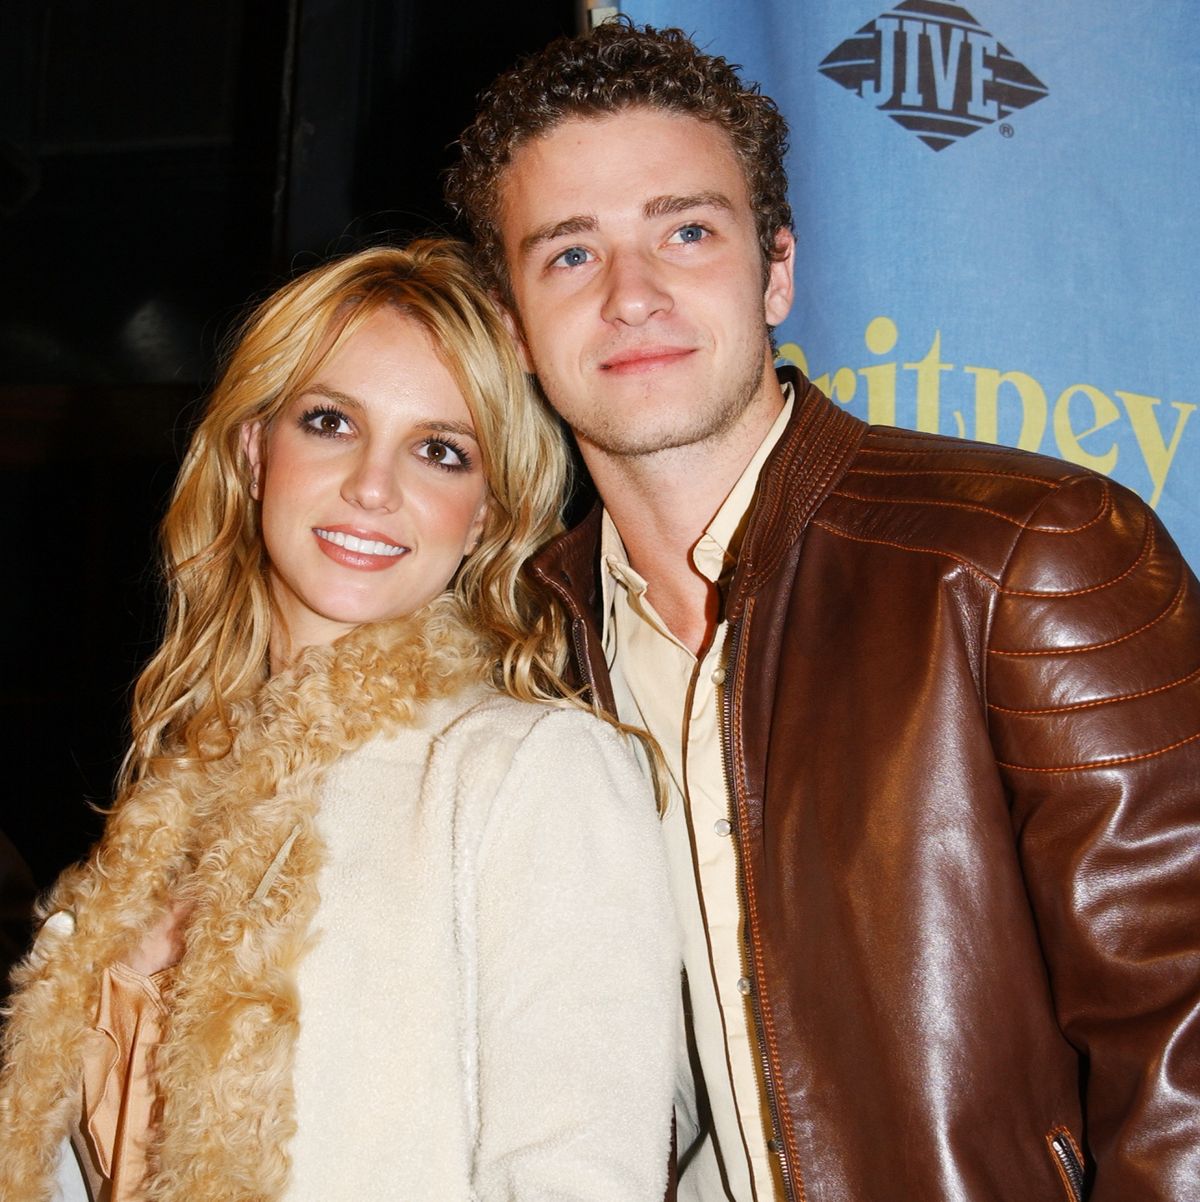 britney spears and boyfriend, 'n sync's justin timberlake, a